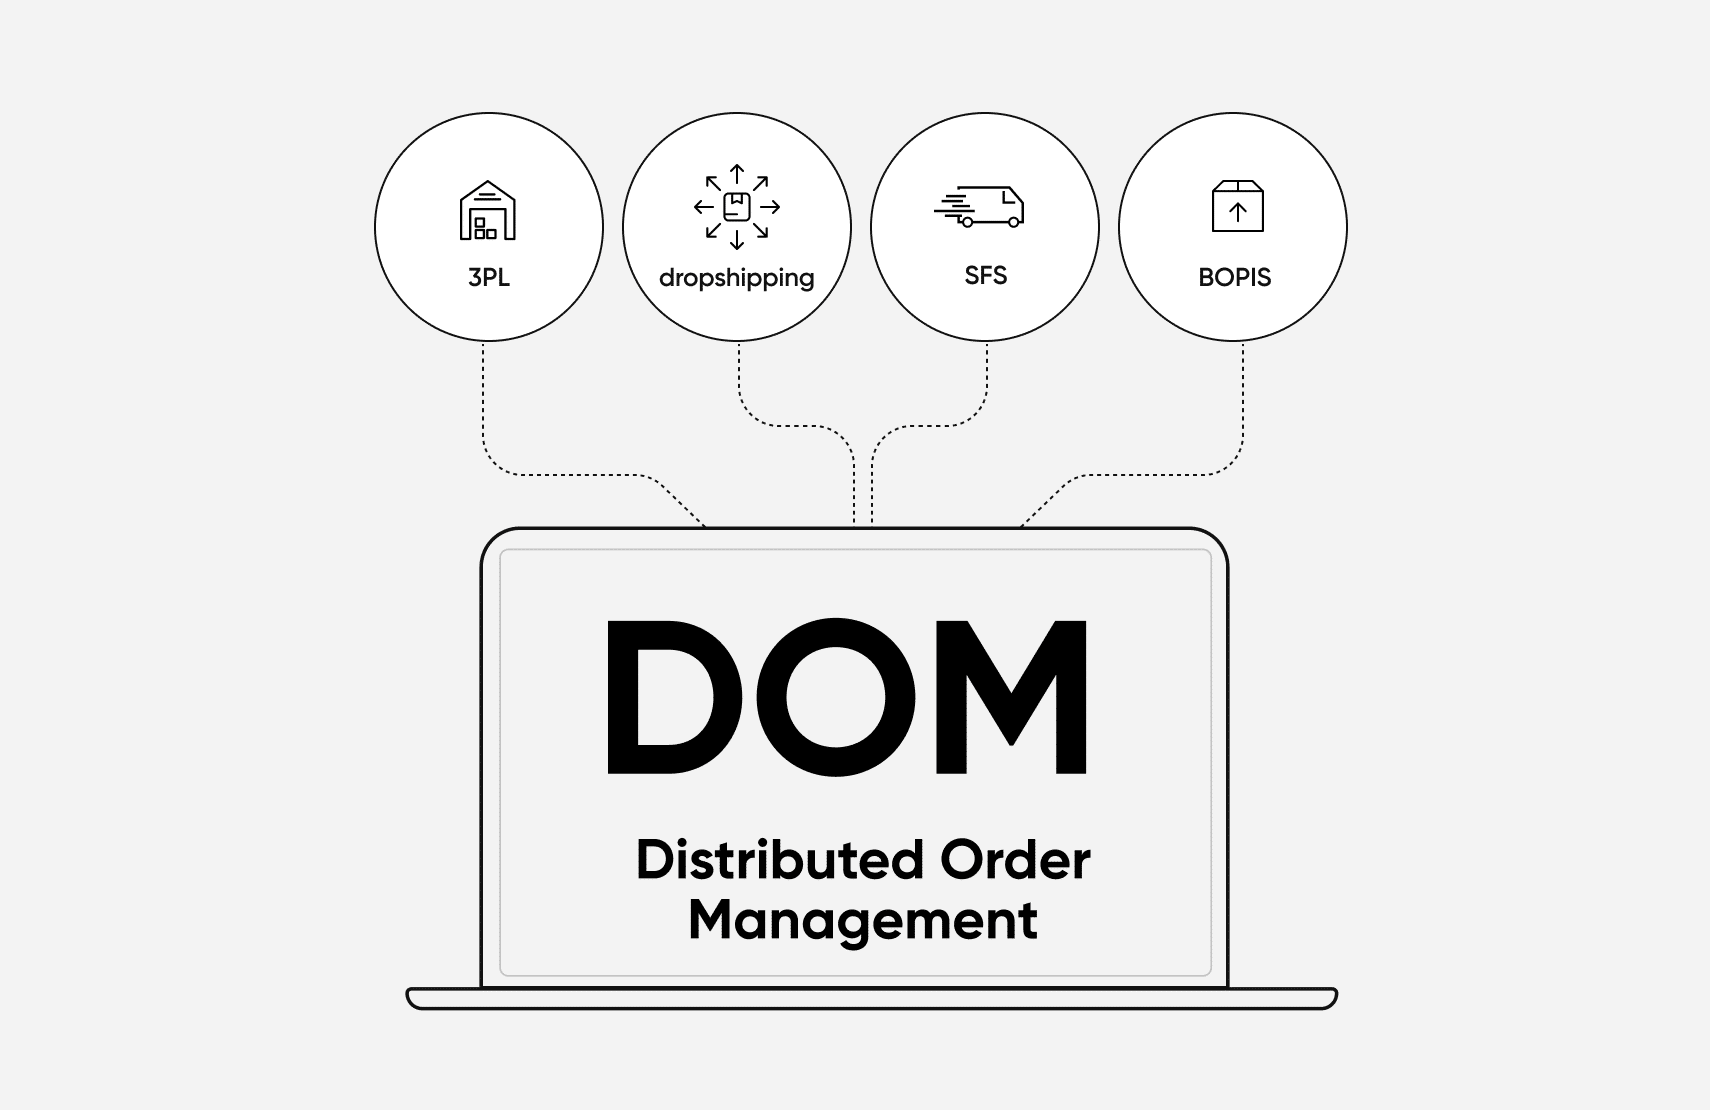 How distributed order management works.